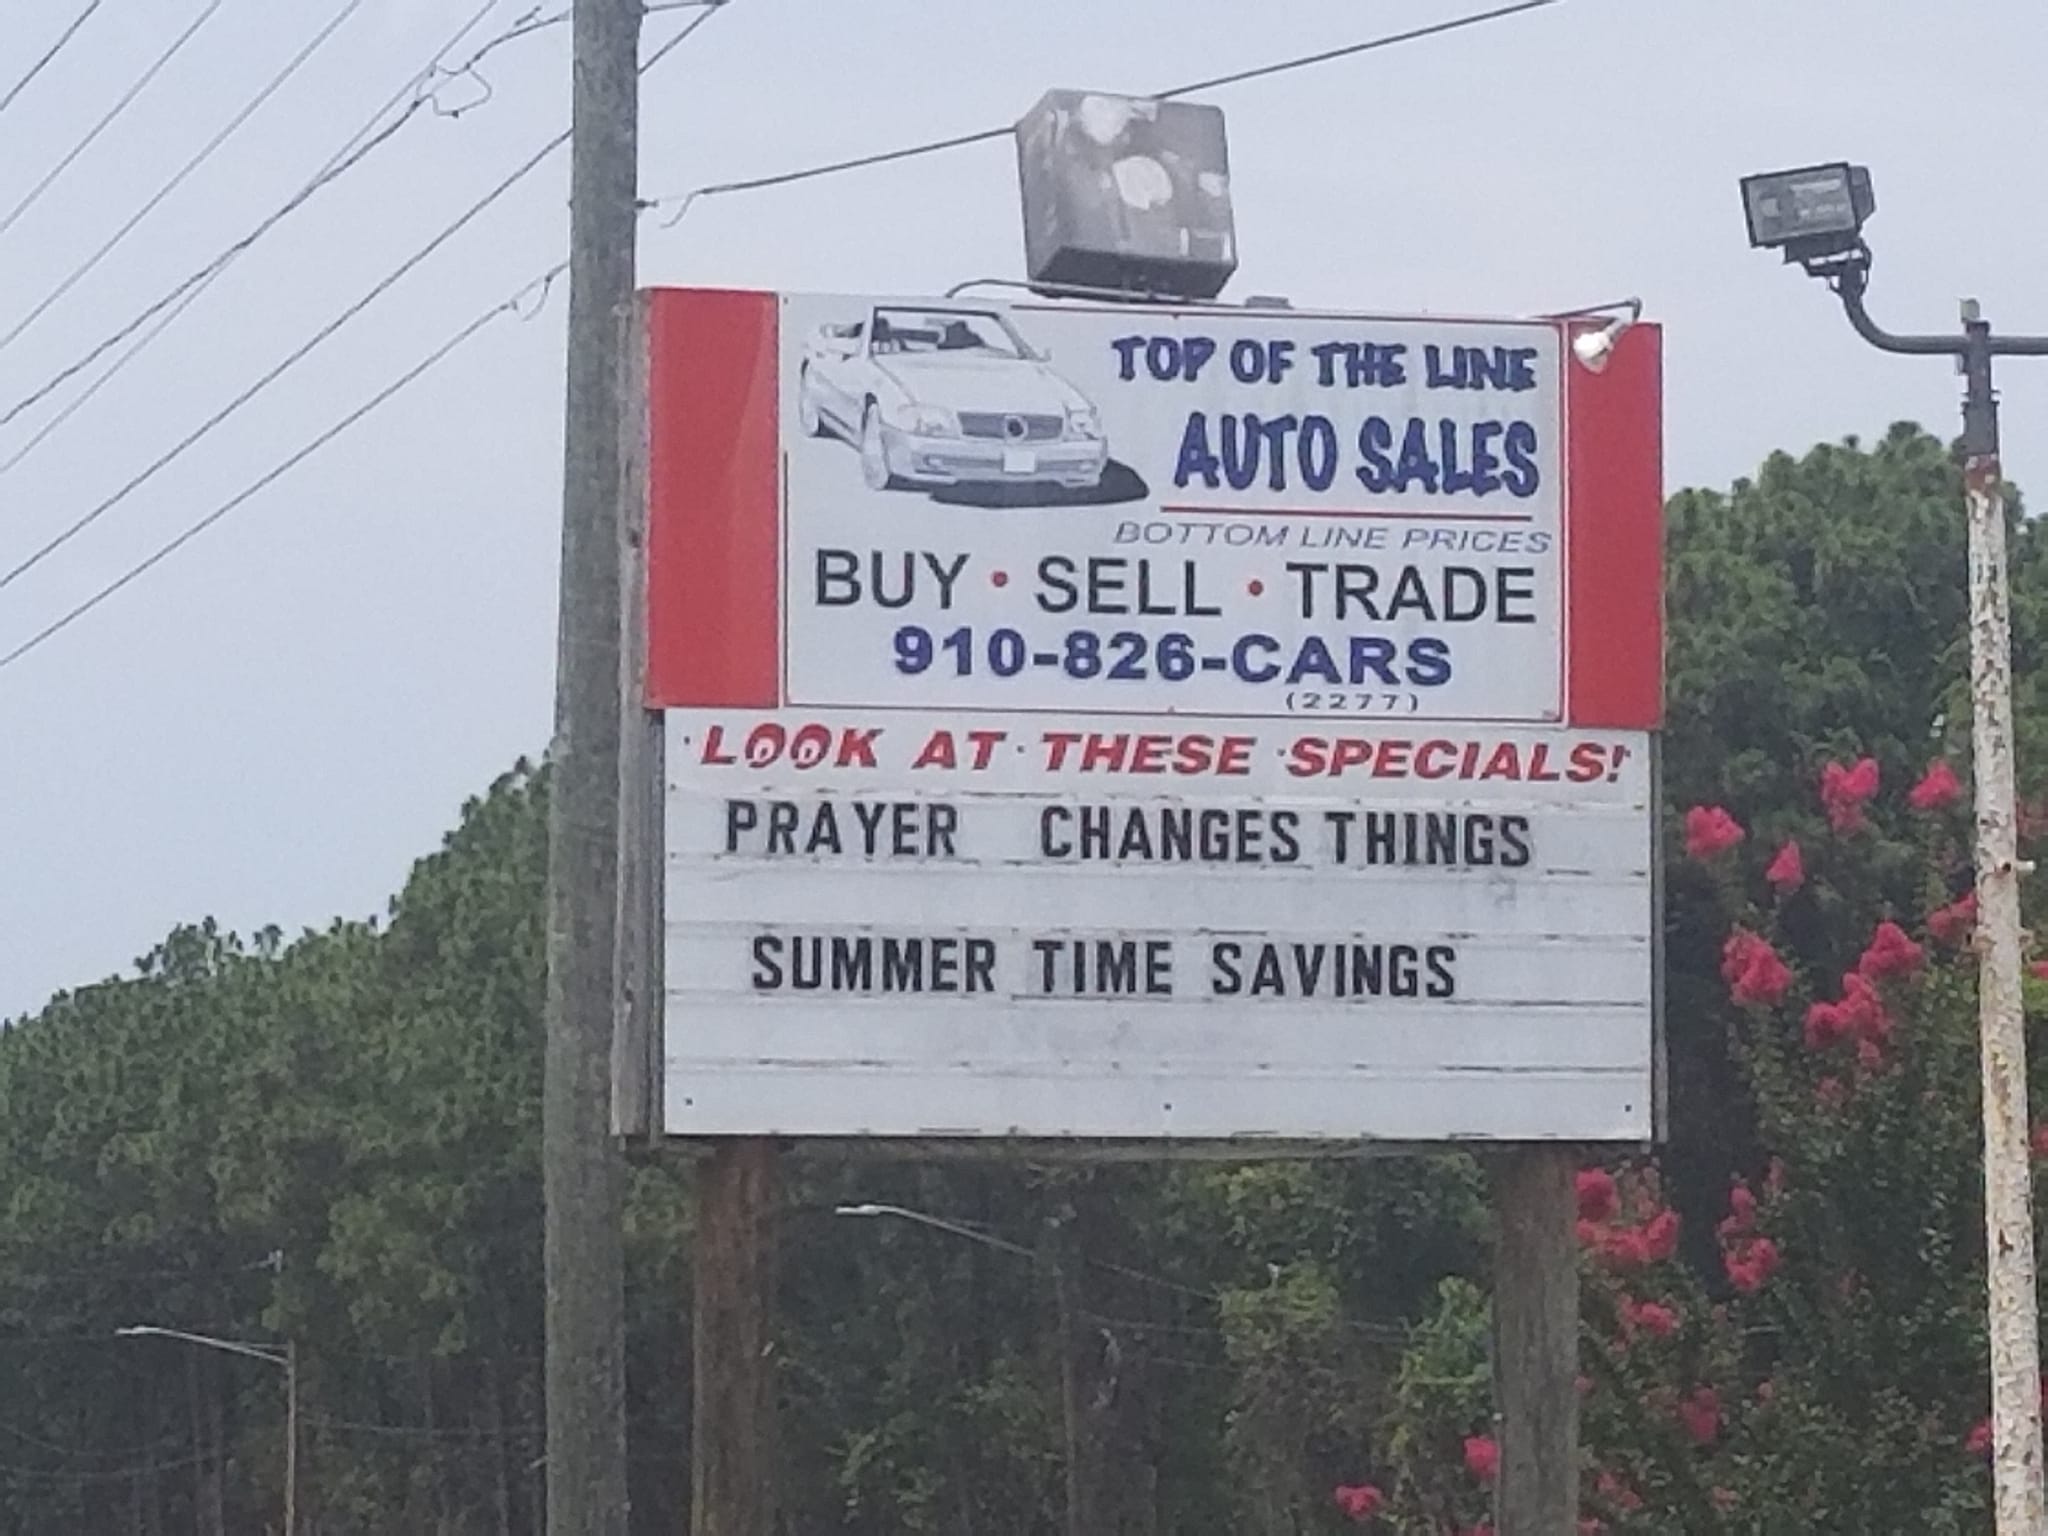 Top of the Line Auto Sales